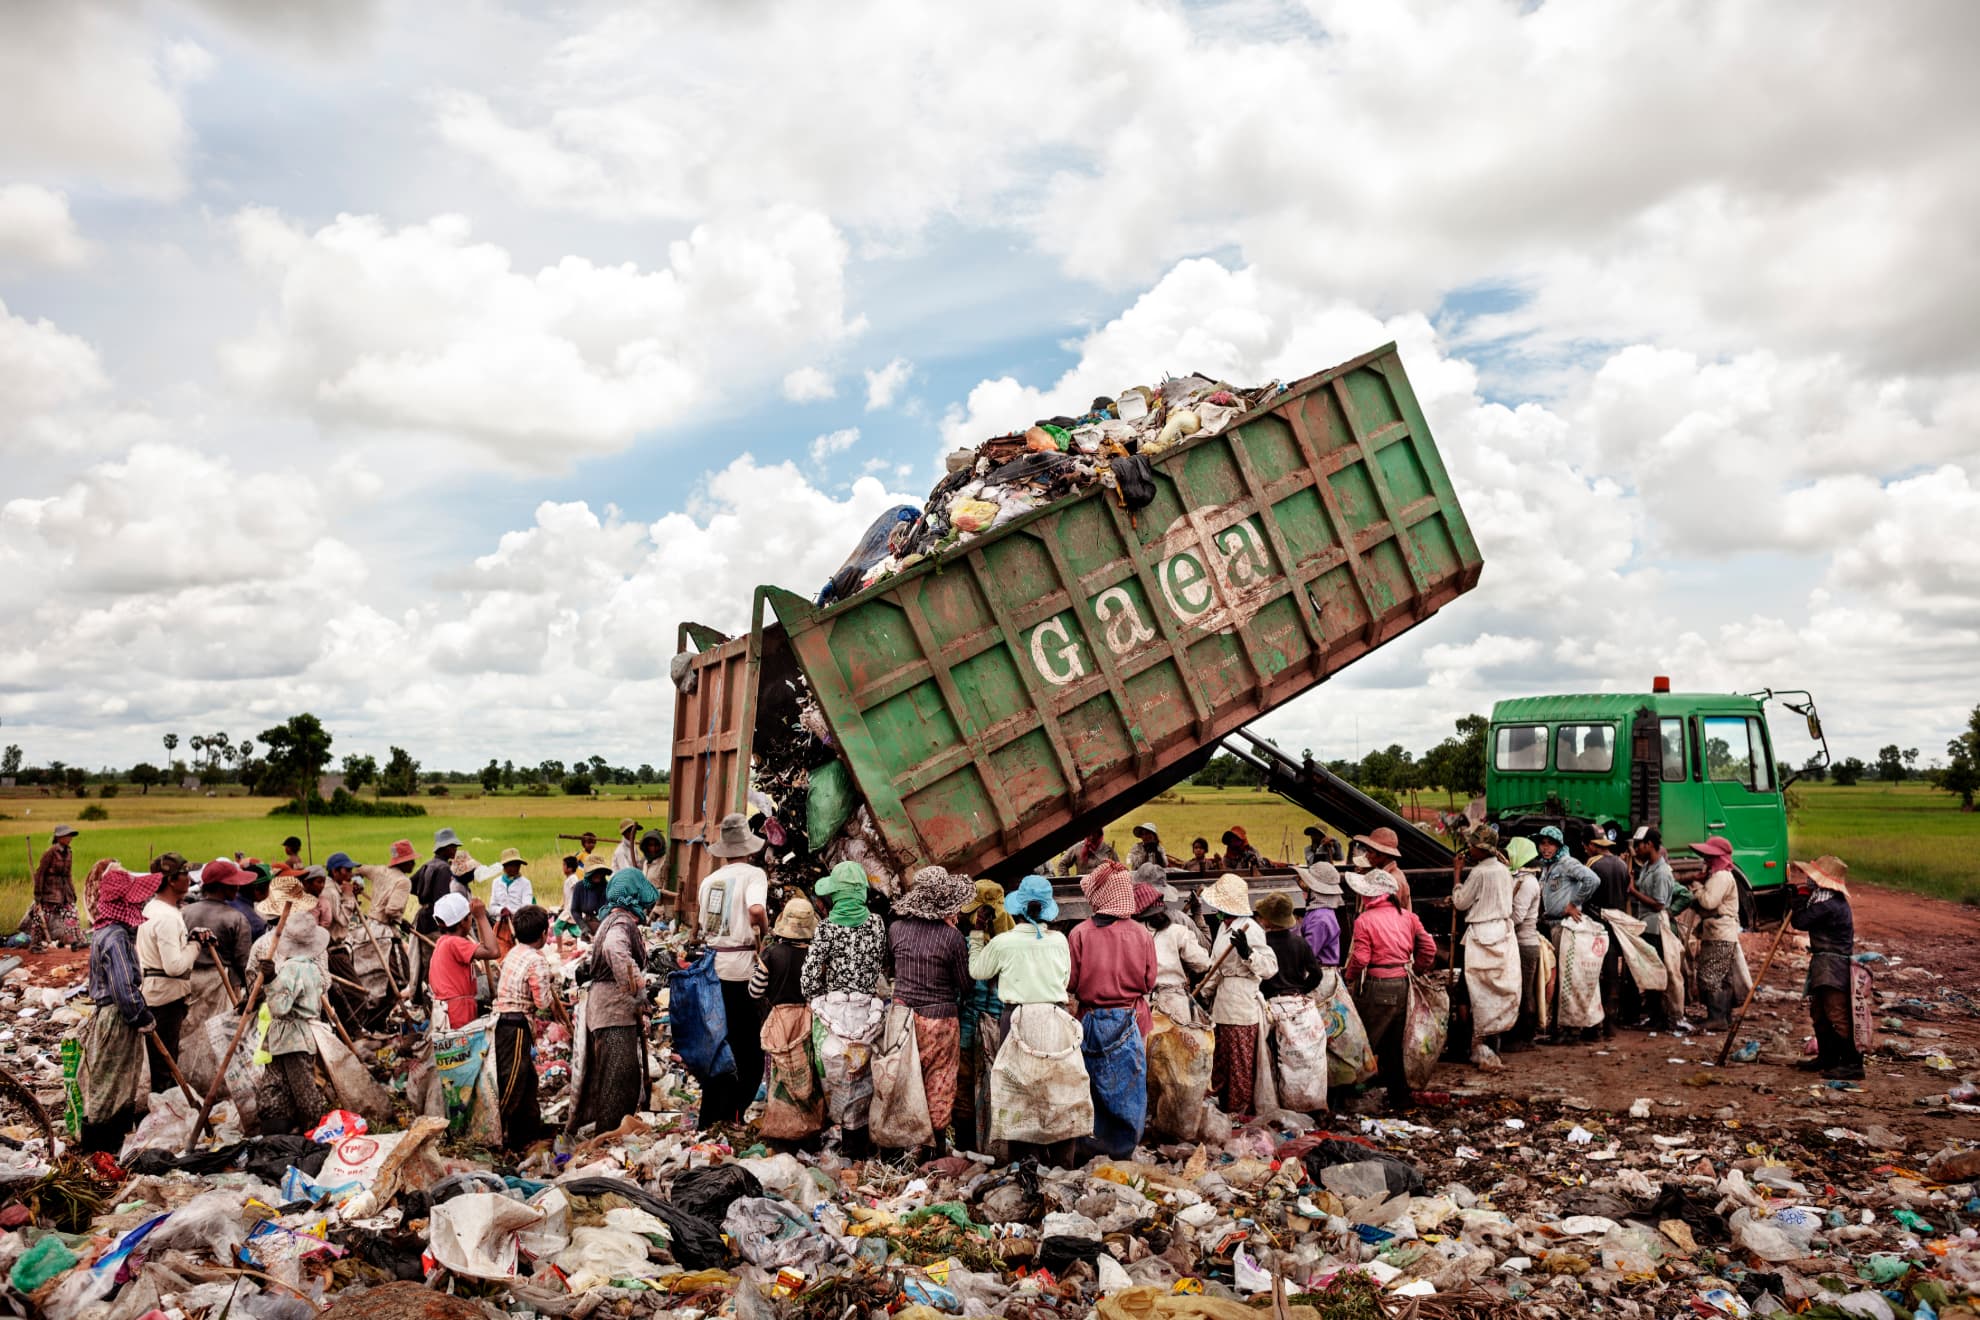 A truck loaded with waste arrives at the Siem Reap rubbish dump in Cambodia. It is estimated that 20 minors work with their families there.